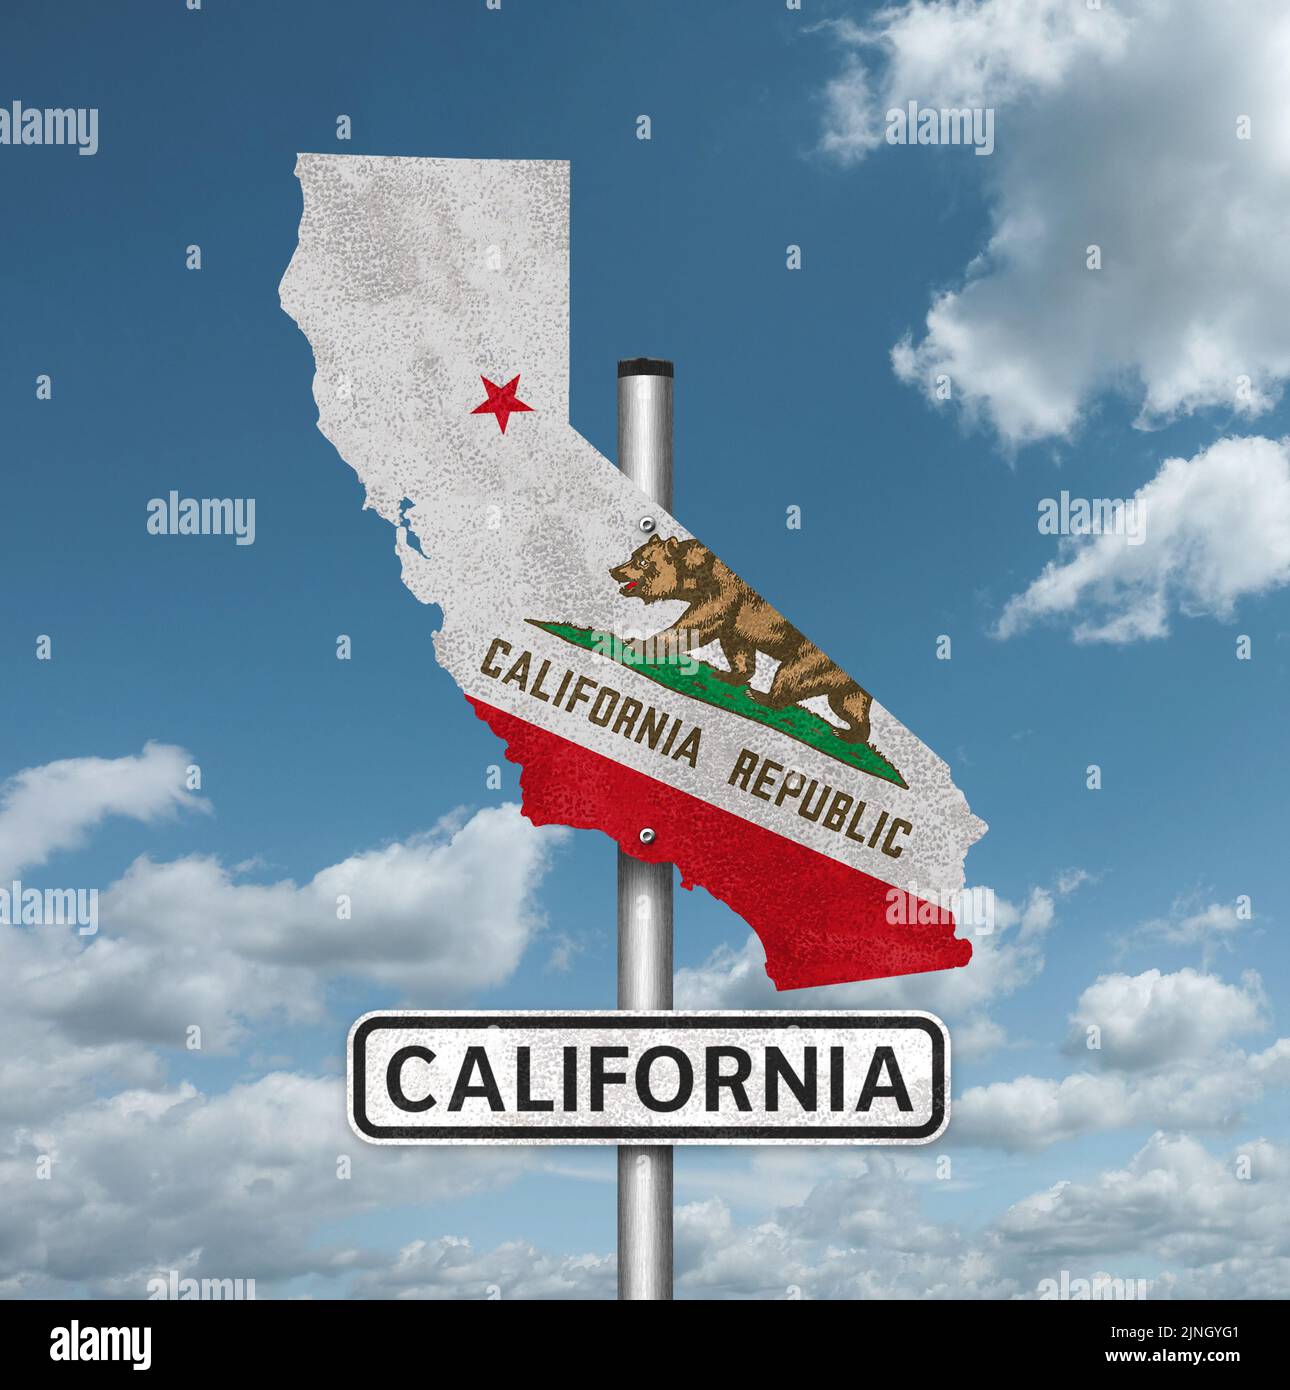 State of California road sign - with flag and map Stock Photo